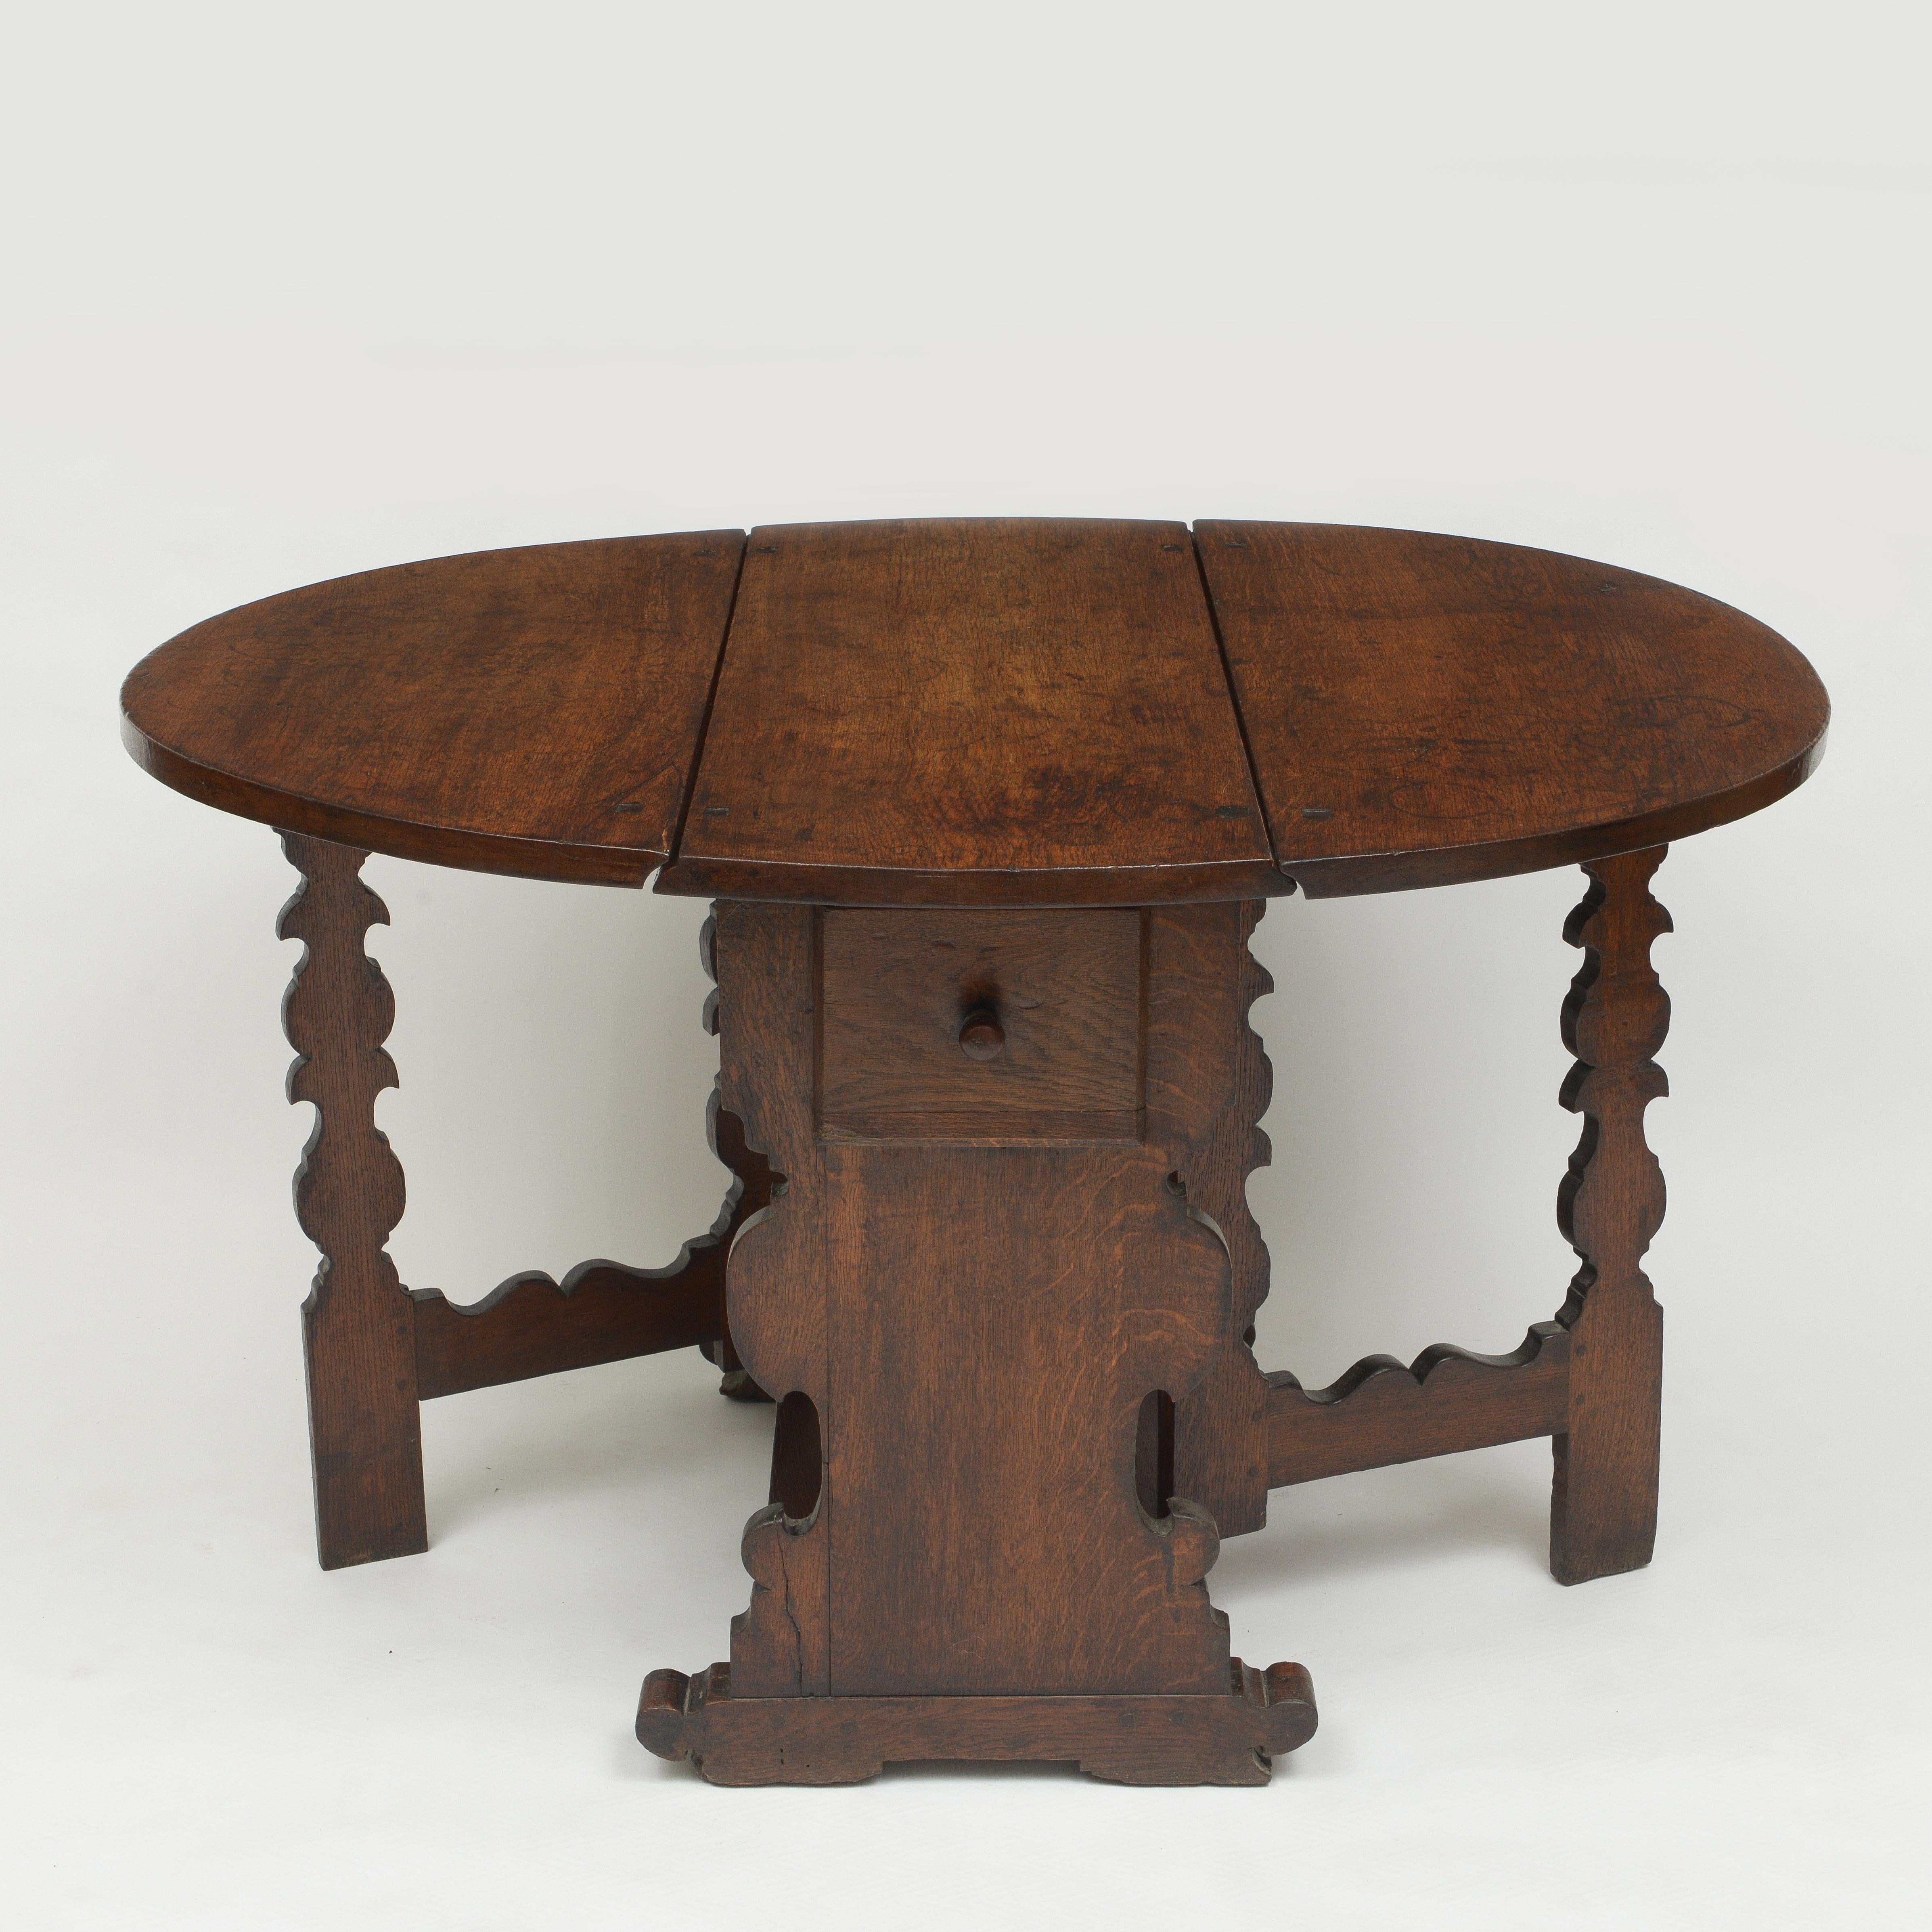 Early oval Oak table with carved gate legs and single drawer
Exceptional wax finish with great patina
All joints and hinges in good working order
Leaves down closed dimensions is 16 inches wide